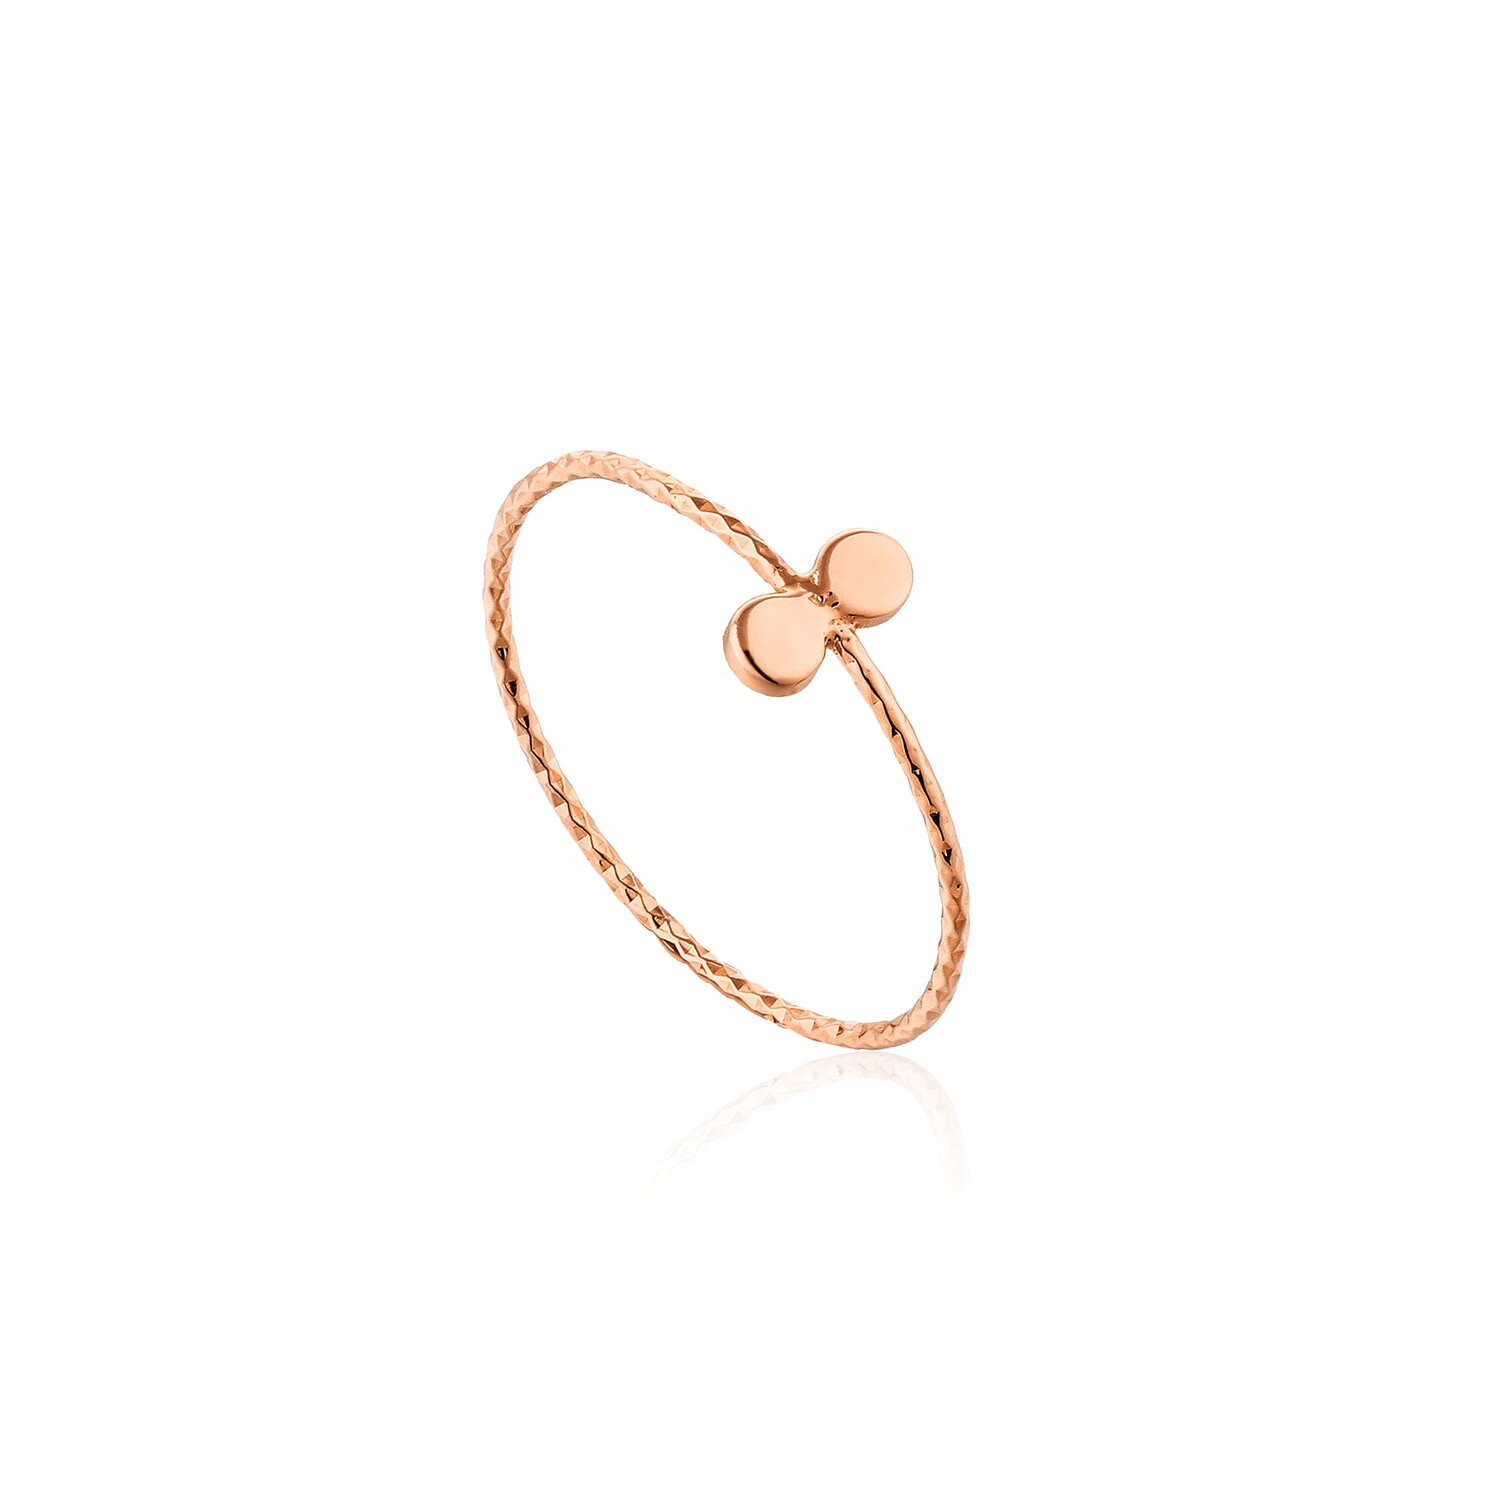 Ania Haie Texture Mix Double Dot Ring in Rose Gold